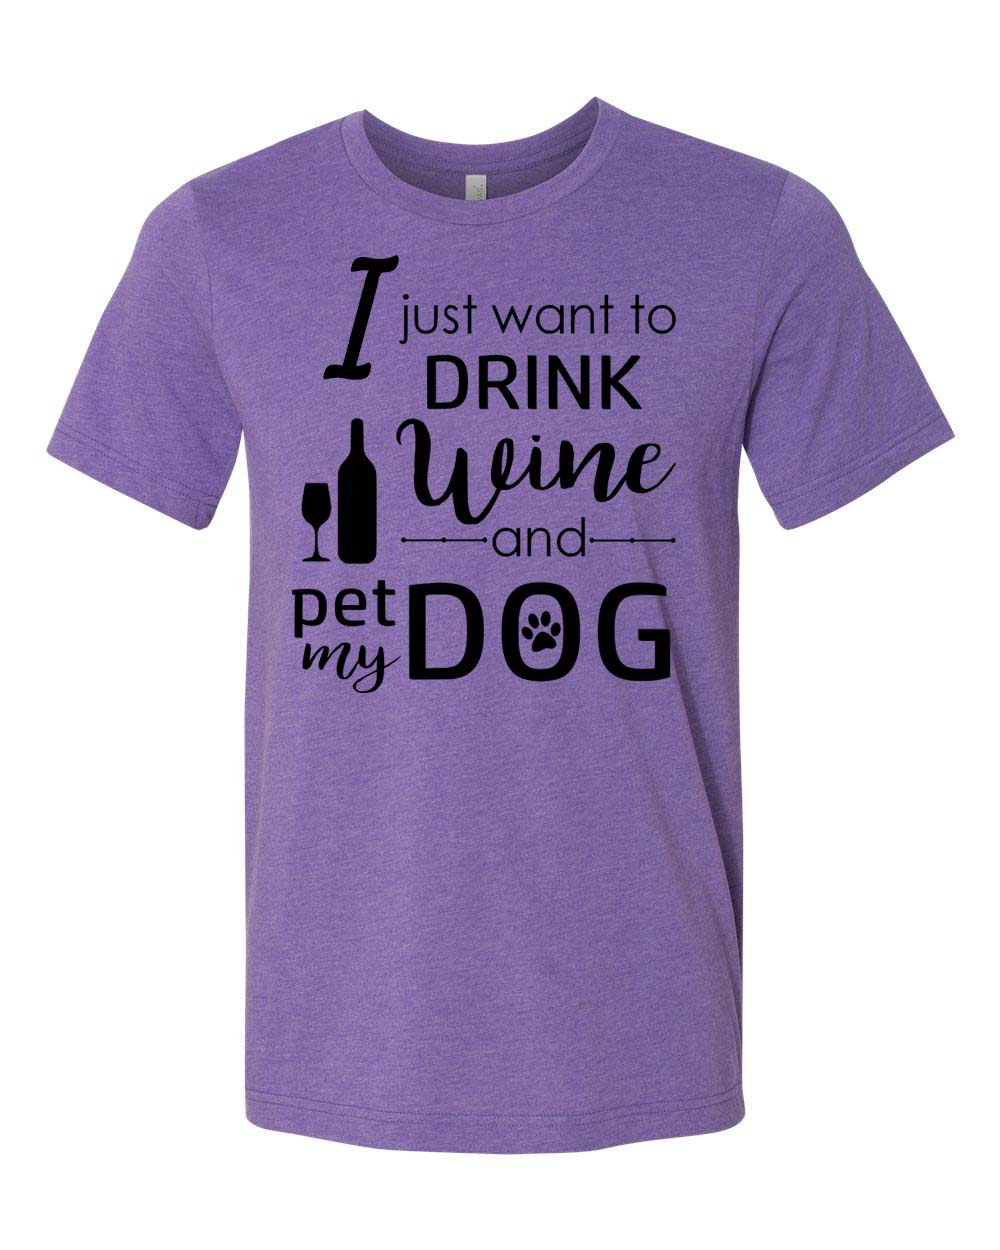 I just want to pet my dog T-shirt